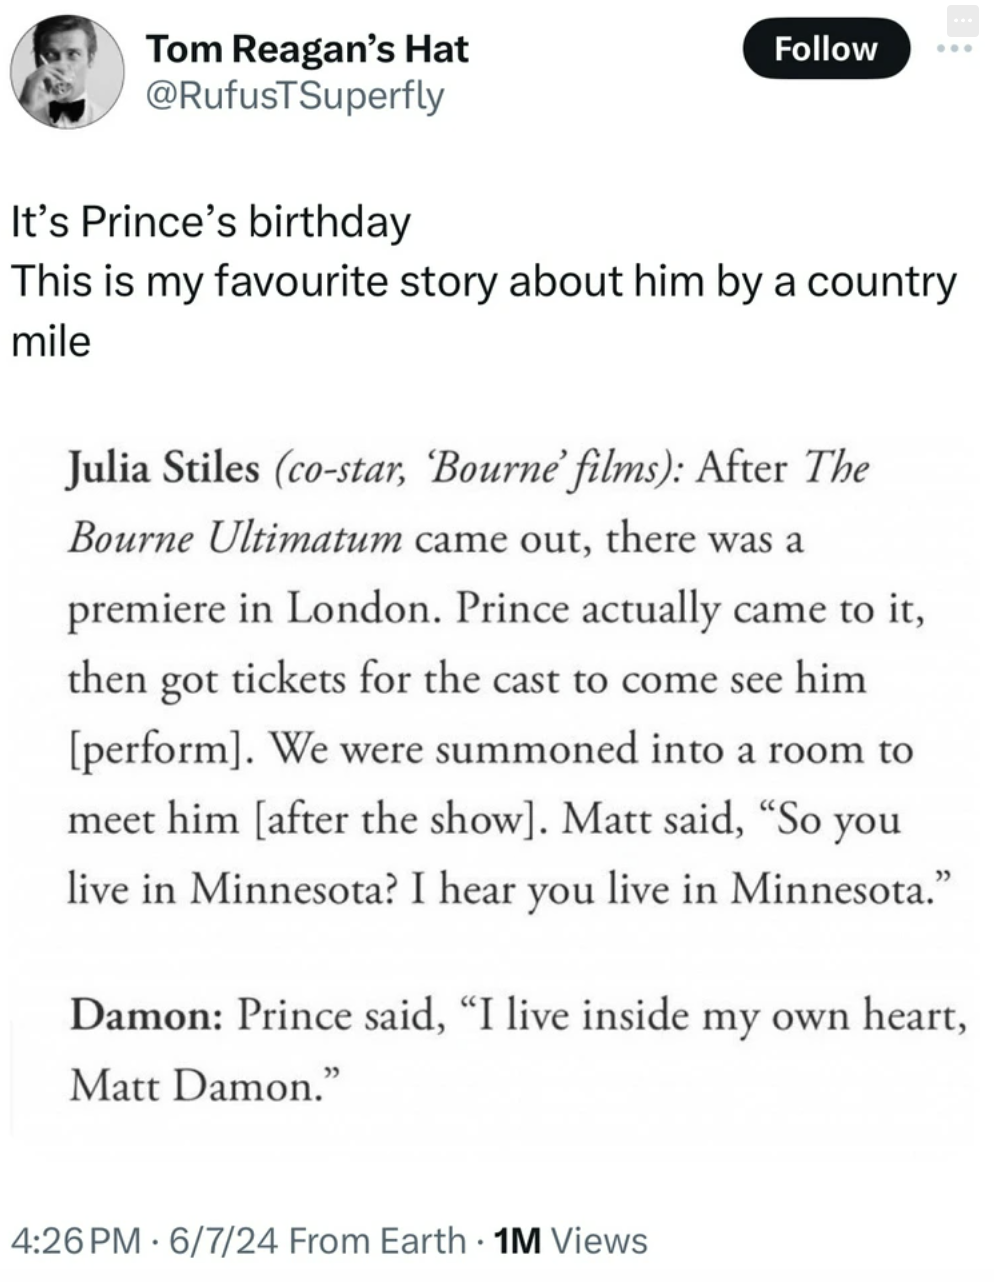 screenshot - Tom Reagan's Hat It's Prince's birthday This is my favourite story about him by a country mile Julia Stiles costar, Bourne' films After The Bourne Ultimatum came out, there was a premiere in London. Prince actually came to it, then got ticket